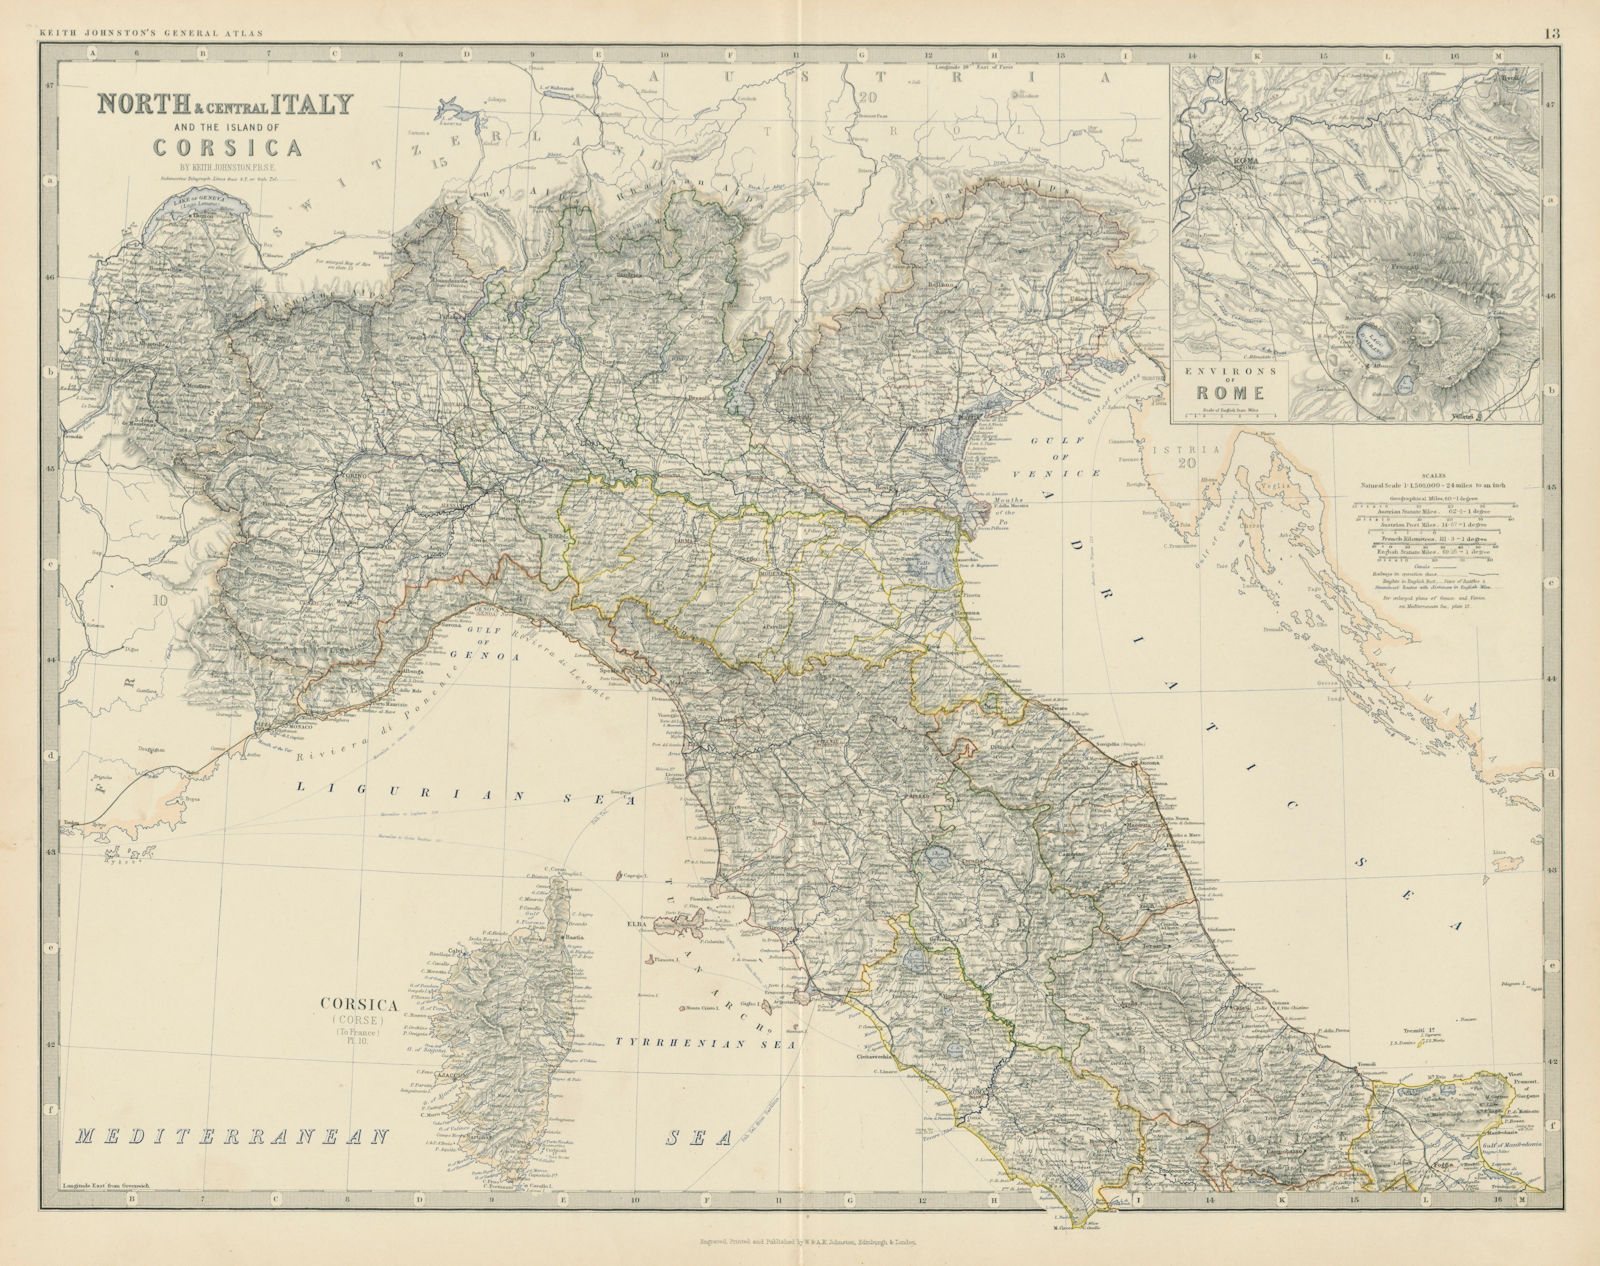 North/Central Italy & Corsica. Savoie. Rome Environs. 50x60cm. JOHNSTON 1879 map